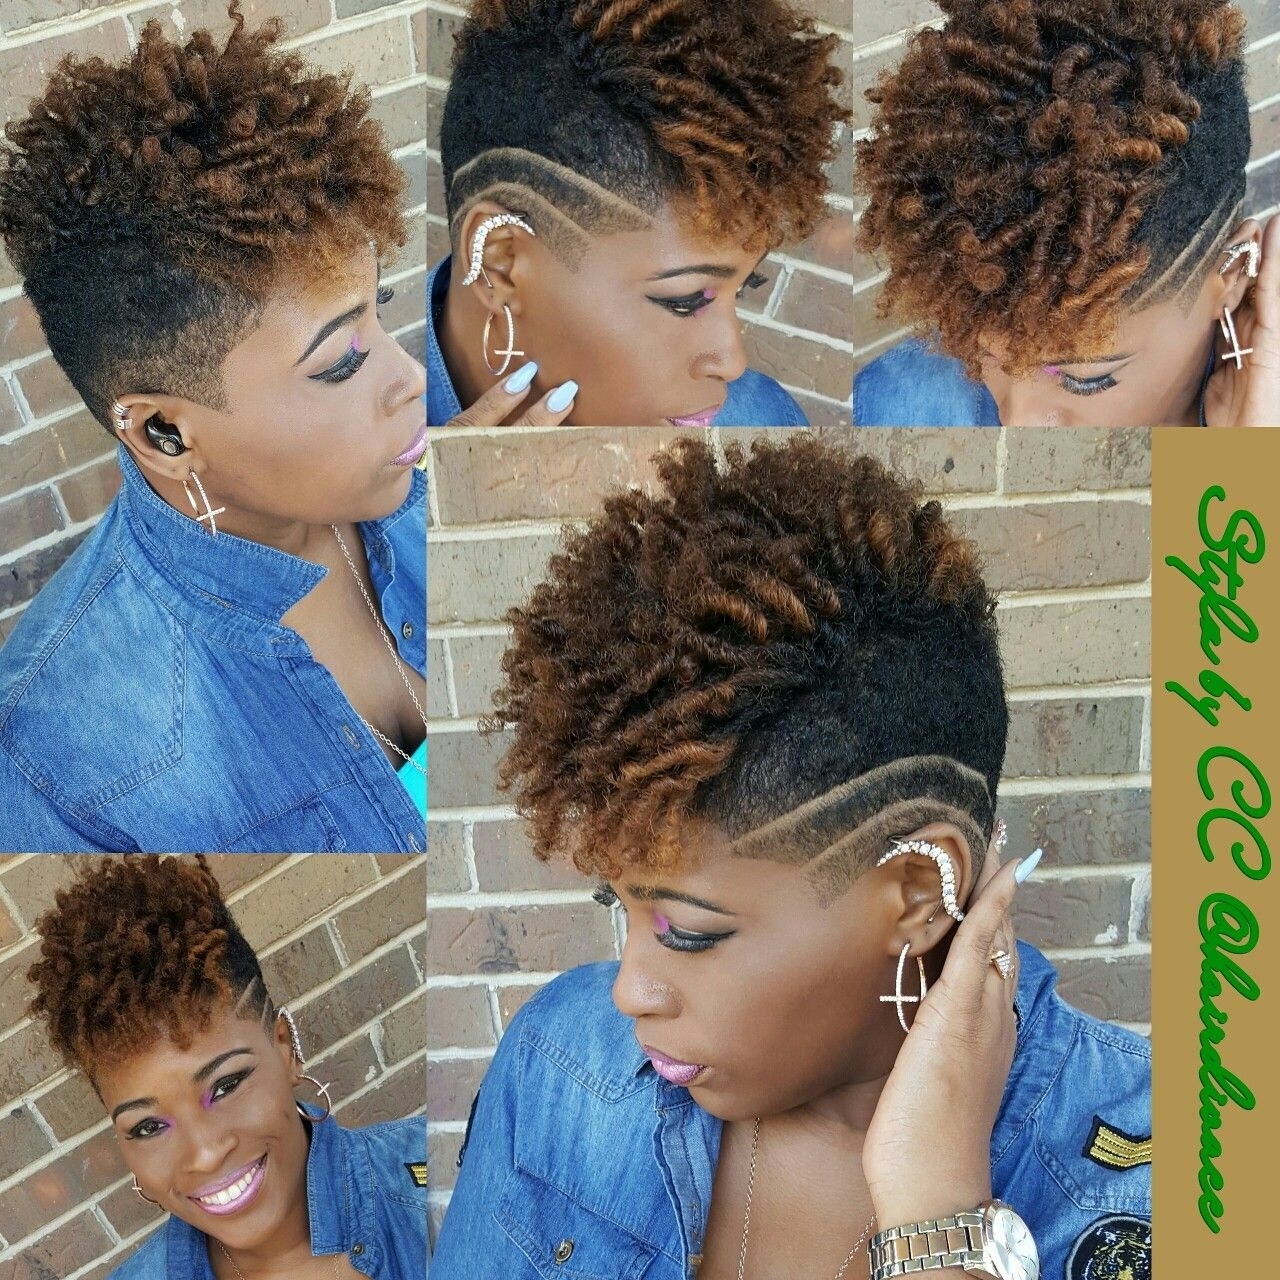 Images Of Black Women Tapered Short Coil Hairstyles - Wavy Haircut